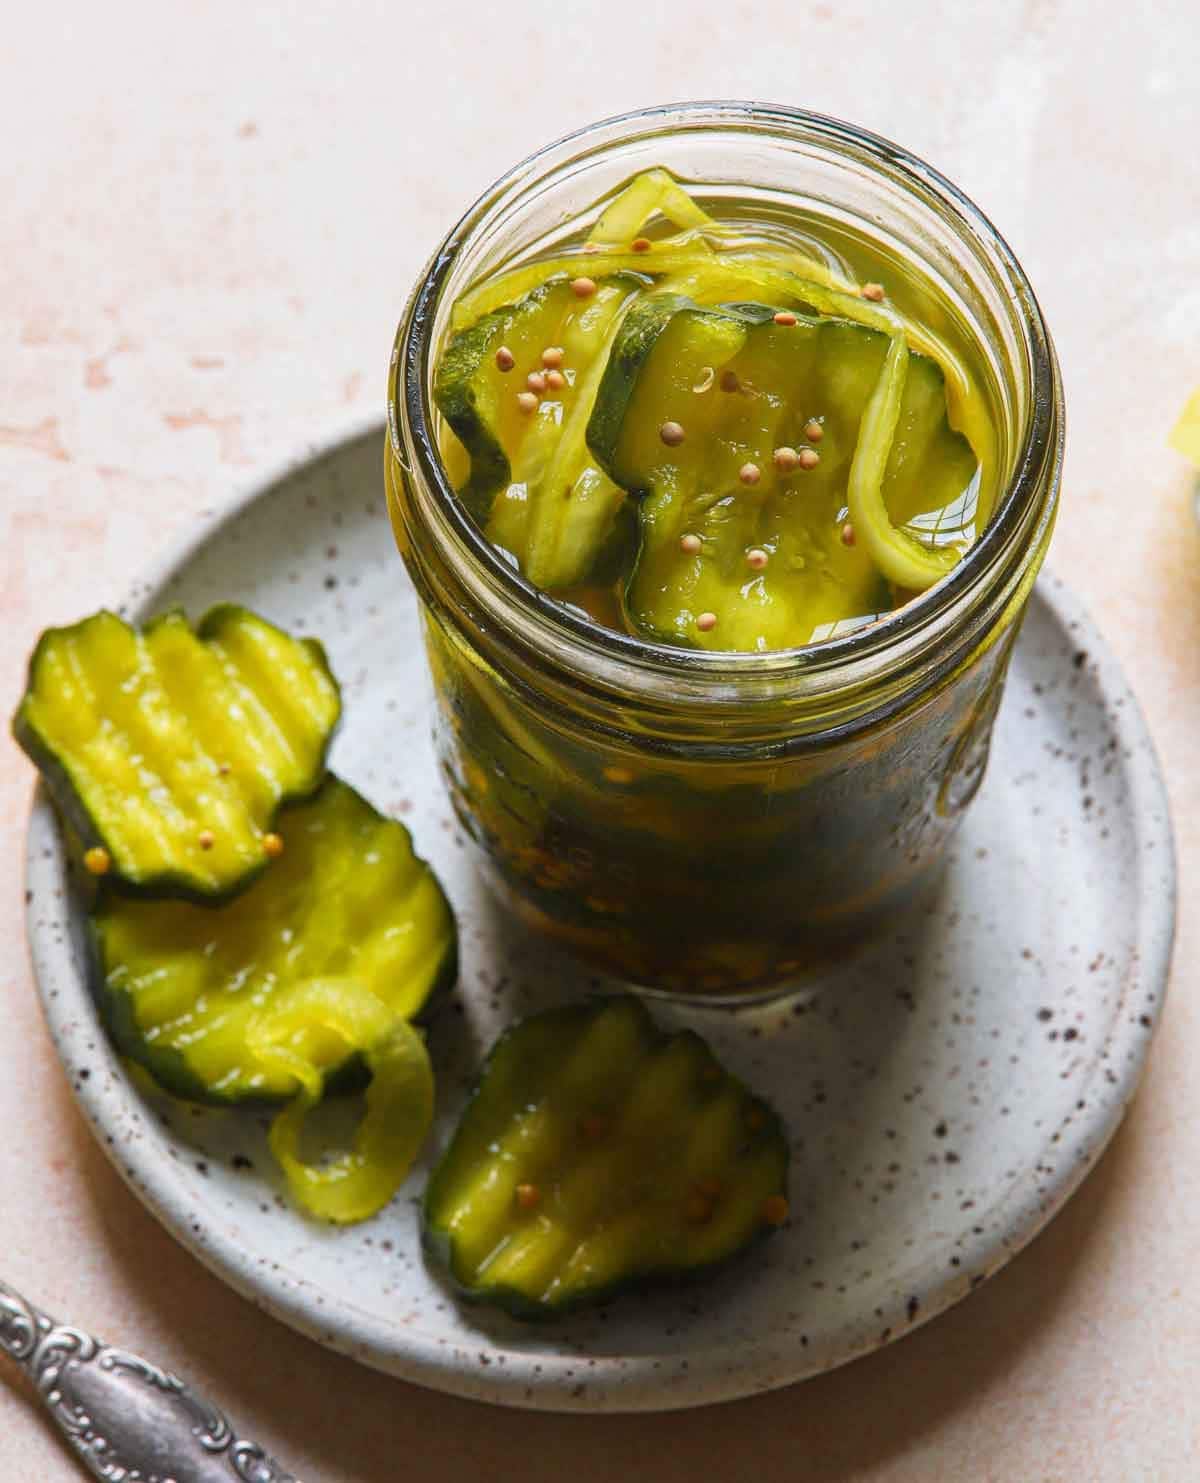 Sliced cucumber soaked in brine on a small glass jar.